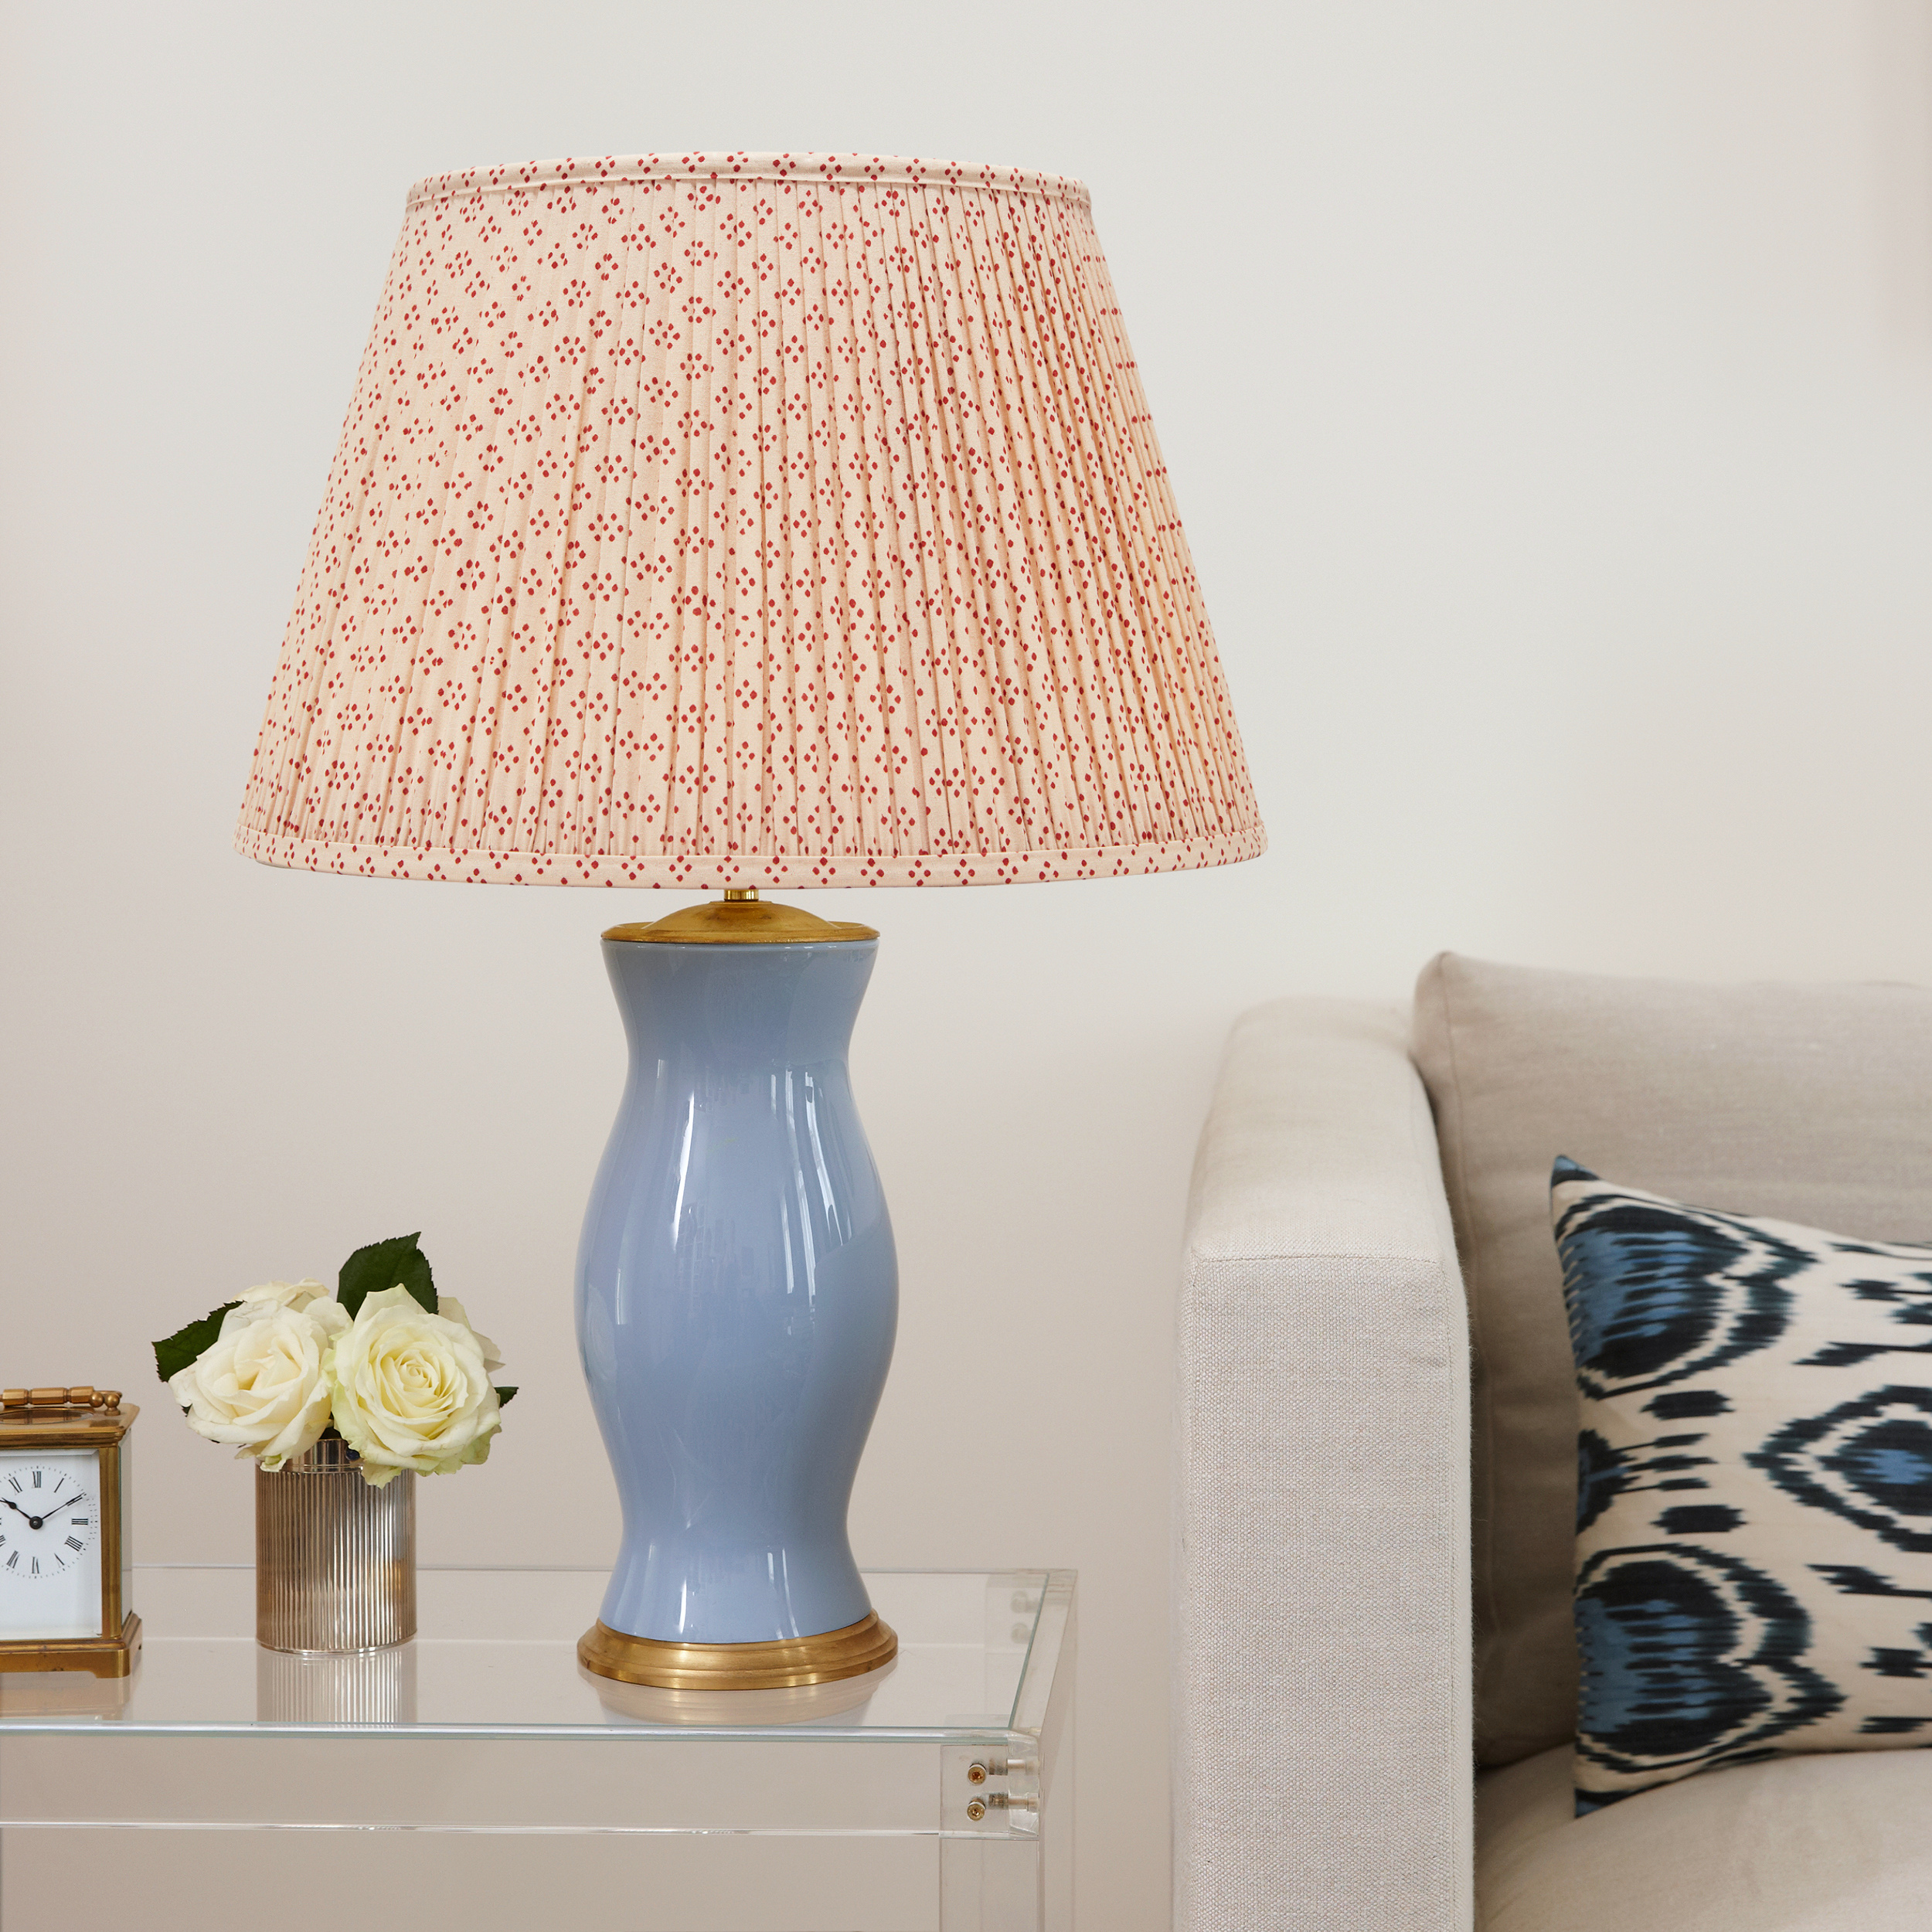 THE FOUR LEAF CLOVER LAMPSHADE